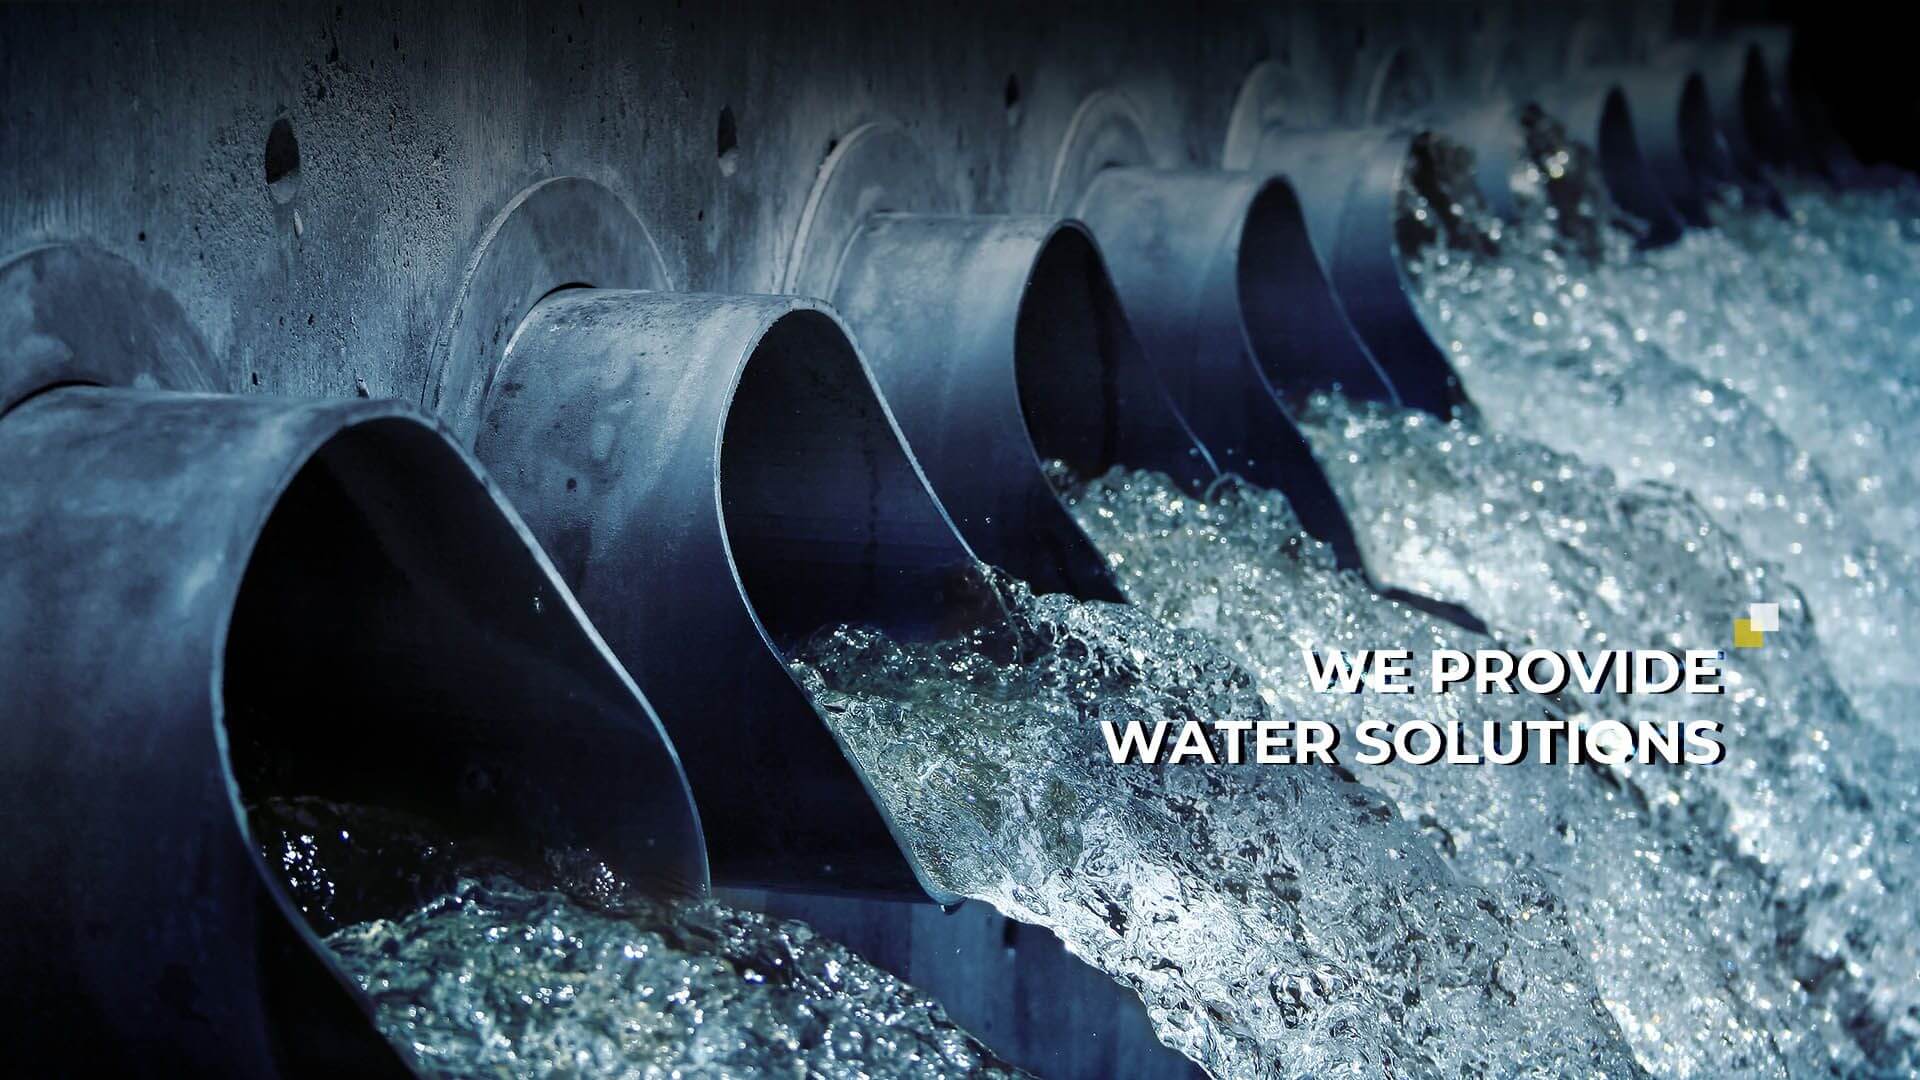 We provide water solutions